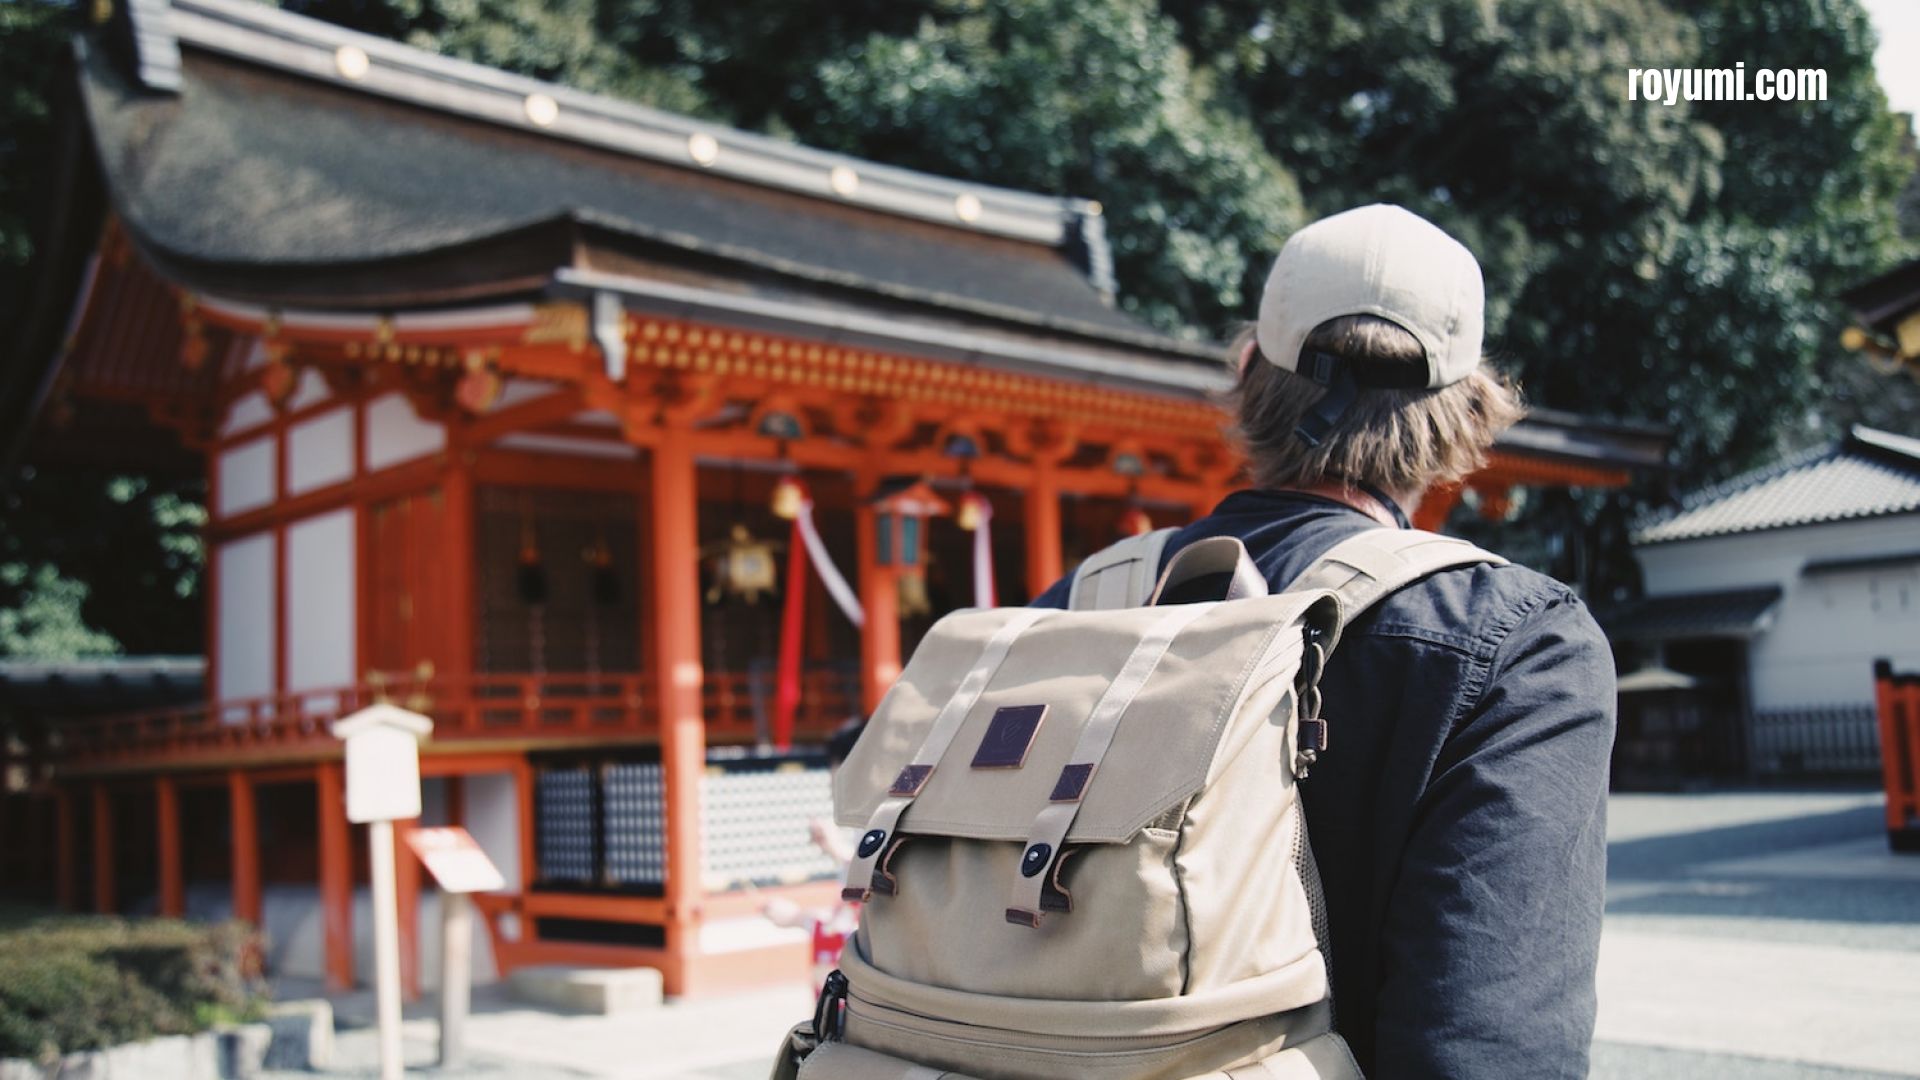 10 Culture Shocks You Might Experience in Japan (and How to Navigate Them Smoothly)